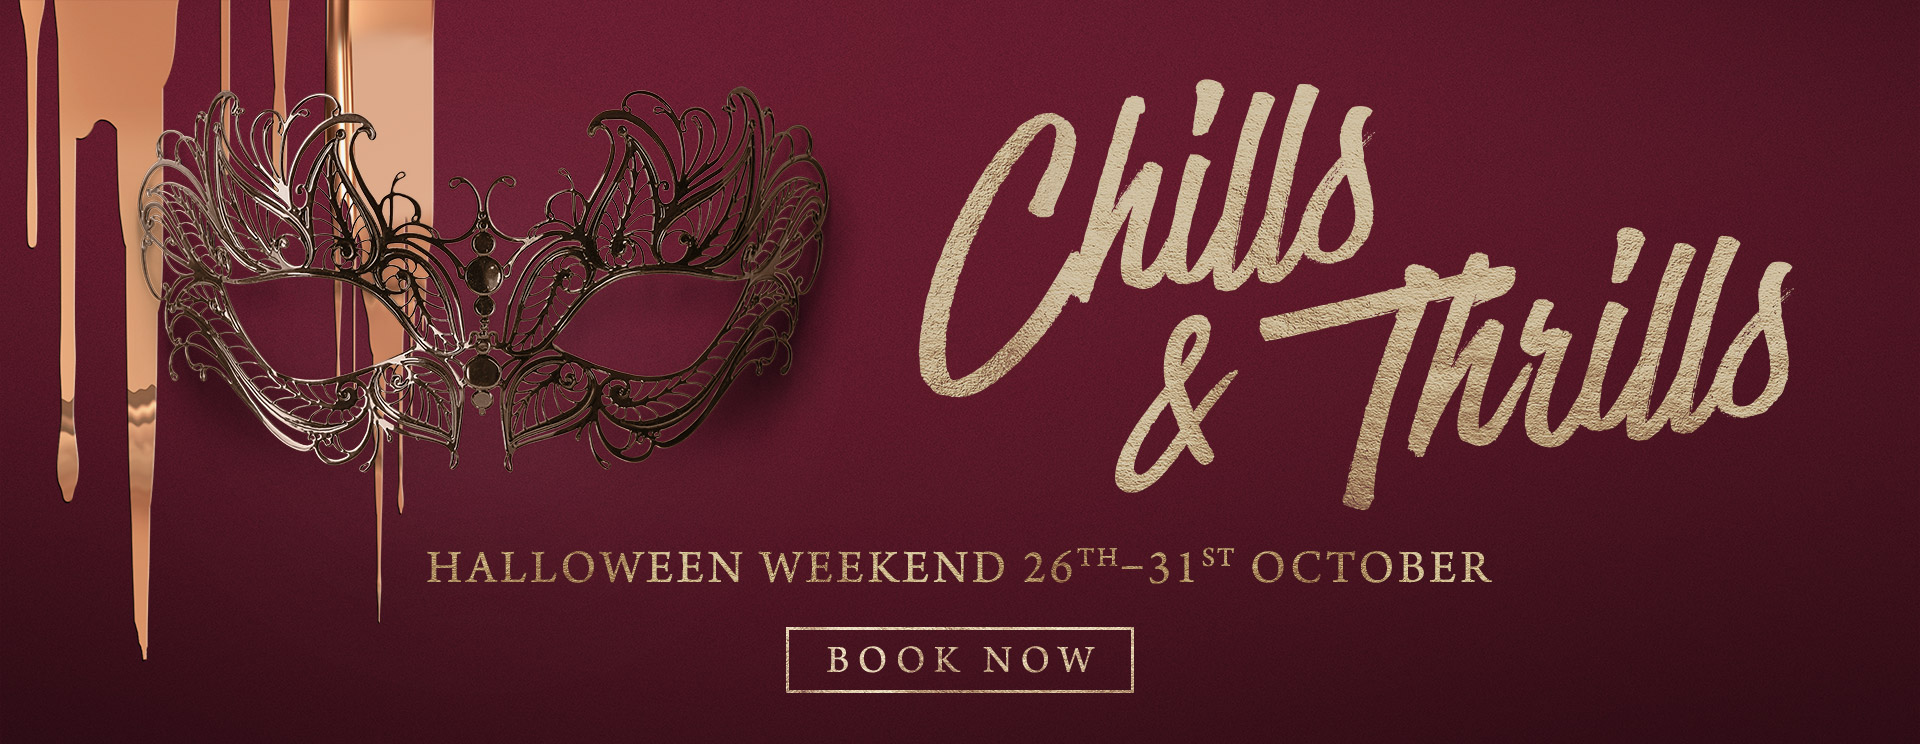 Chills & Thrills this Halloween at The Old Forge